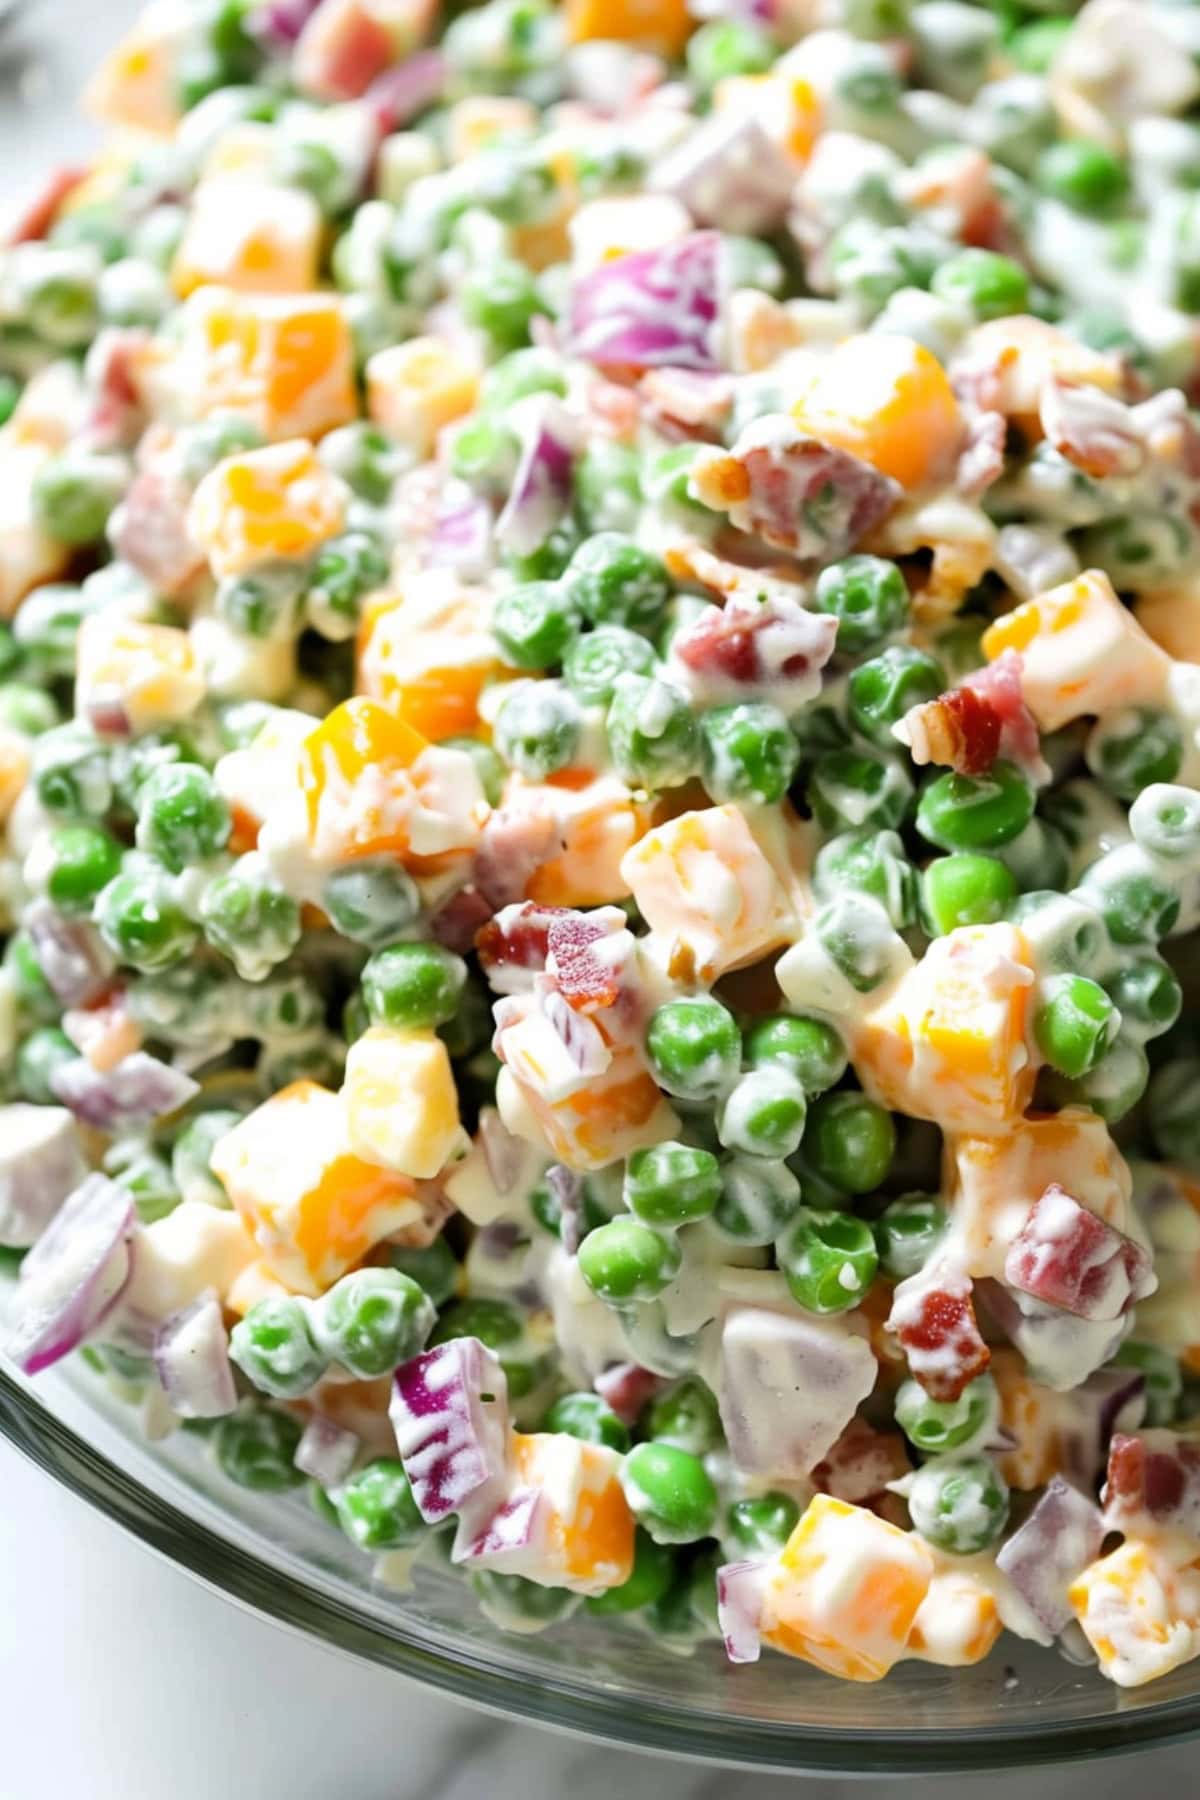 Creamy pea salad in a mixing bowl made with green peas, cheddar cheese, red onions and bacon with mayonnaise.